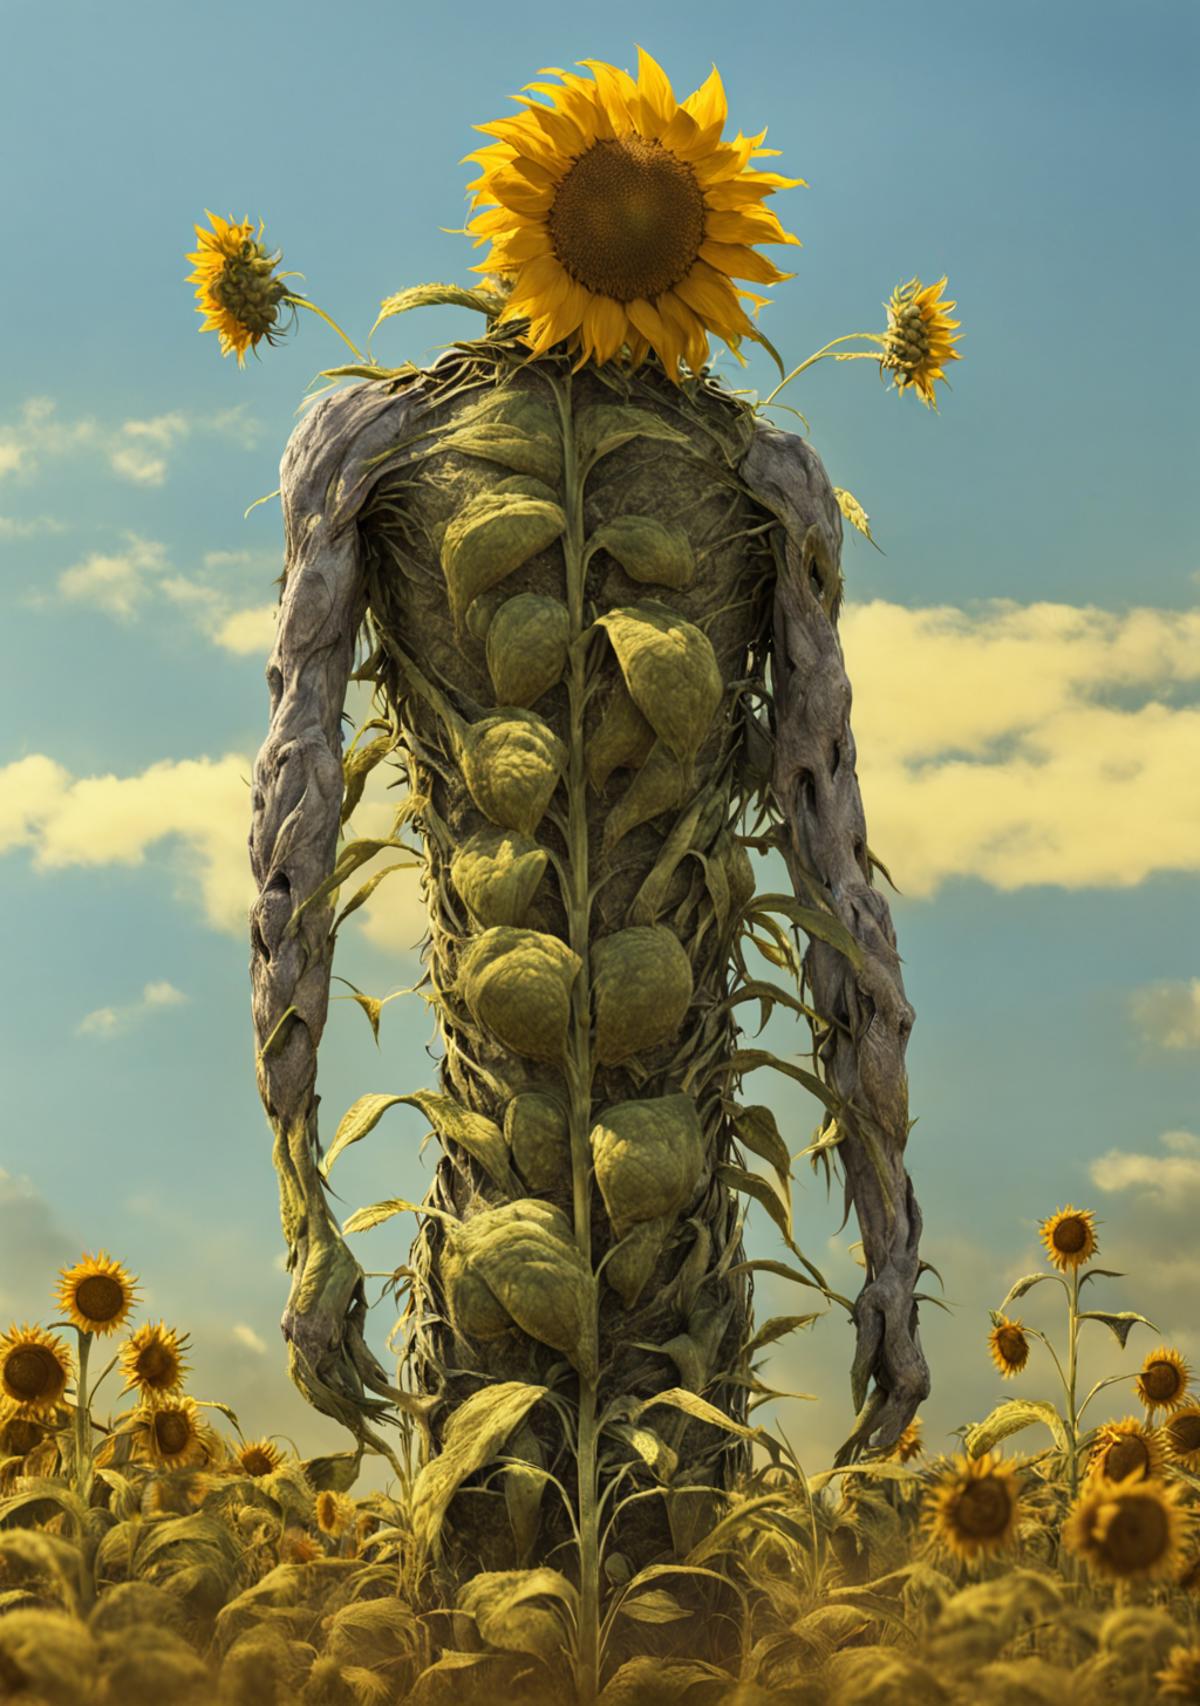 The Scarecrow with Sunflowers: A Mixed Media Artwork